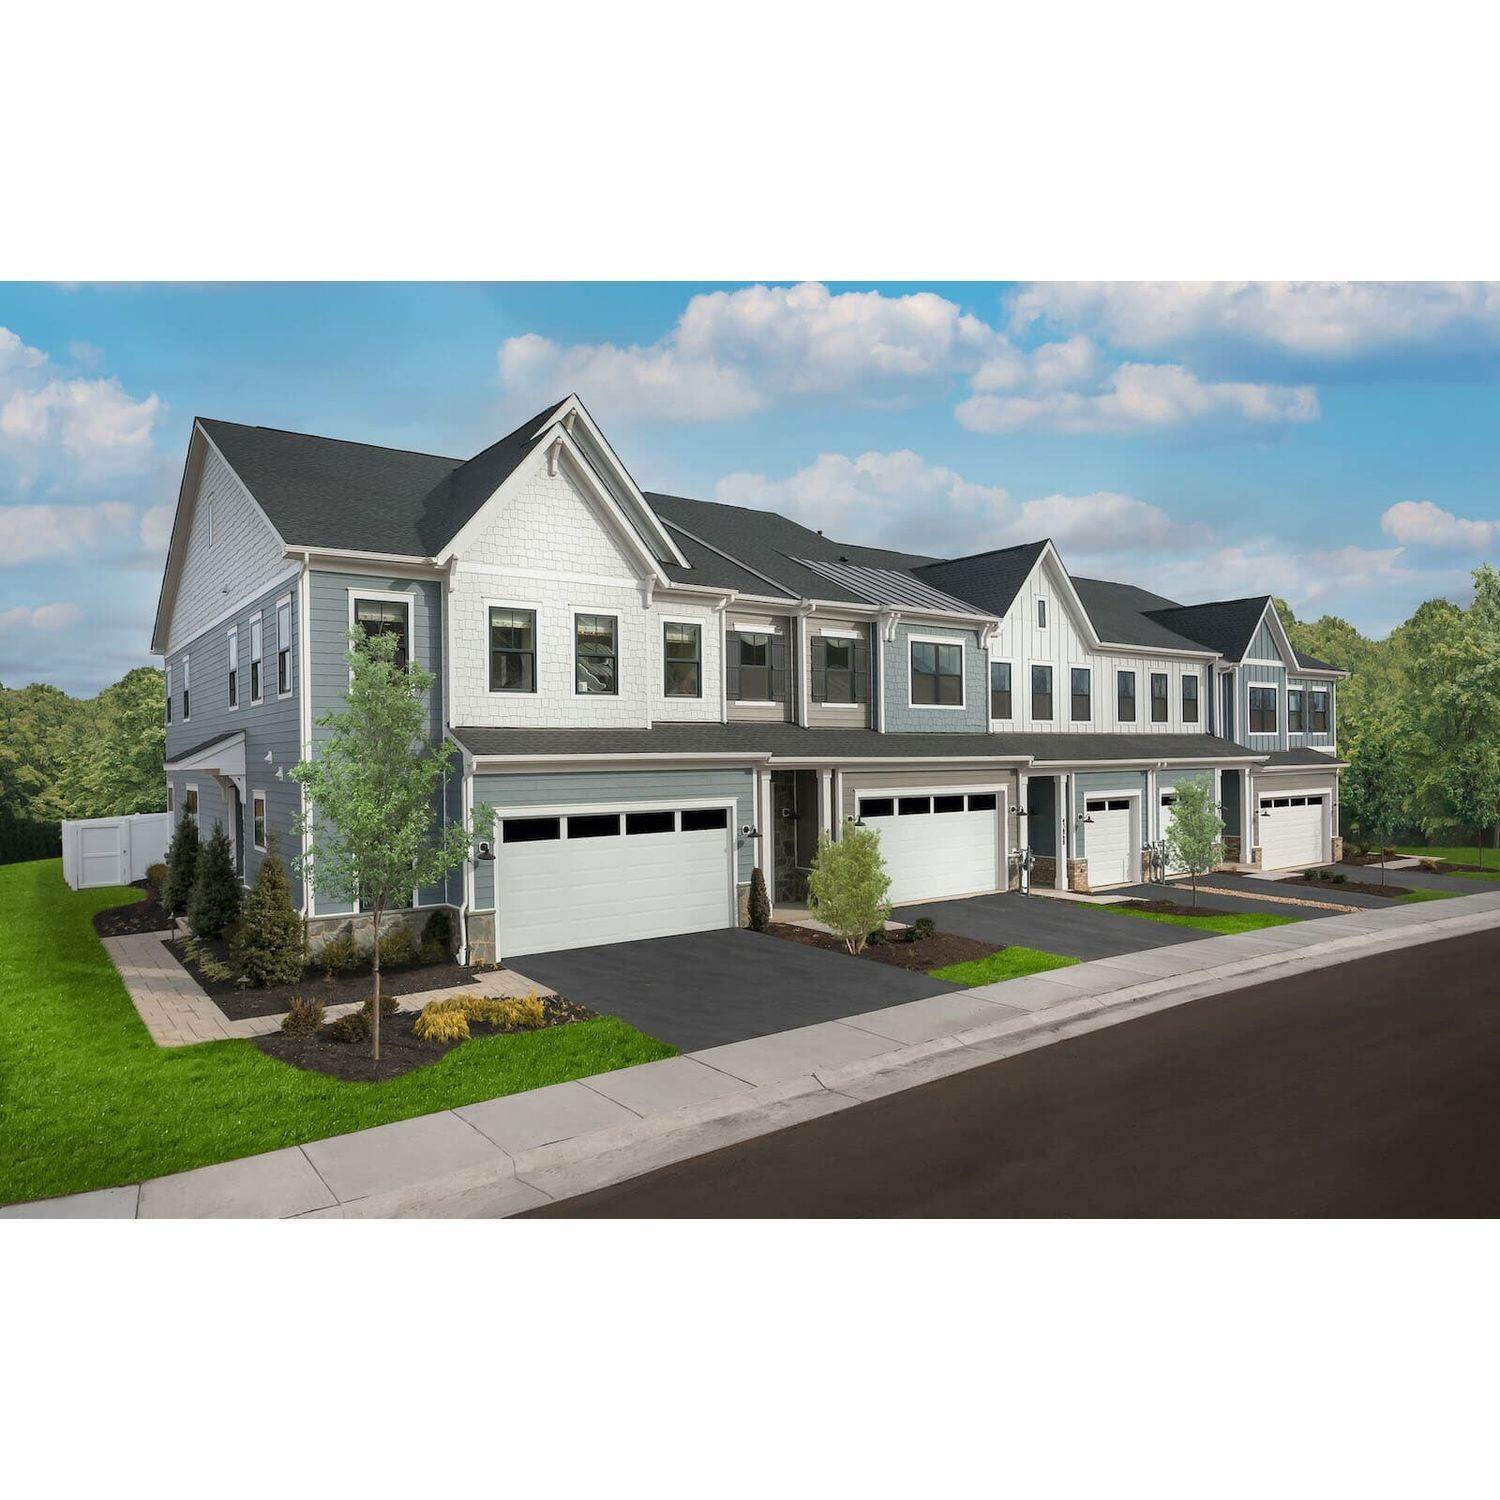 Herenhuis voor Verkoop op 55+ Villas Collection At The Crest At Linton Hall Now Selling From Cadence At Lansdowne, Bristow, VA 20136